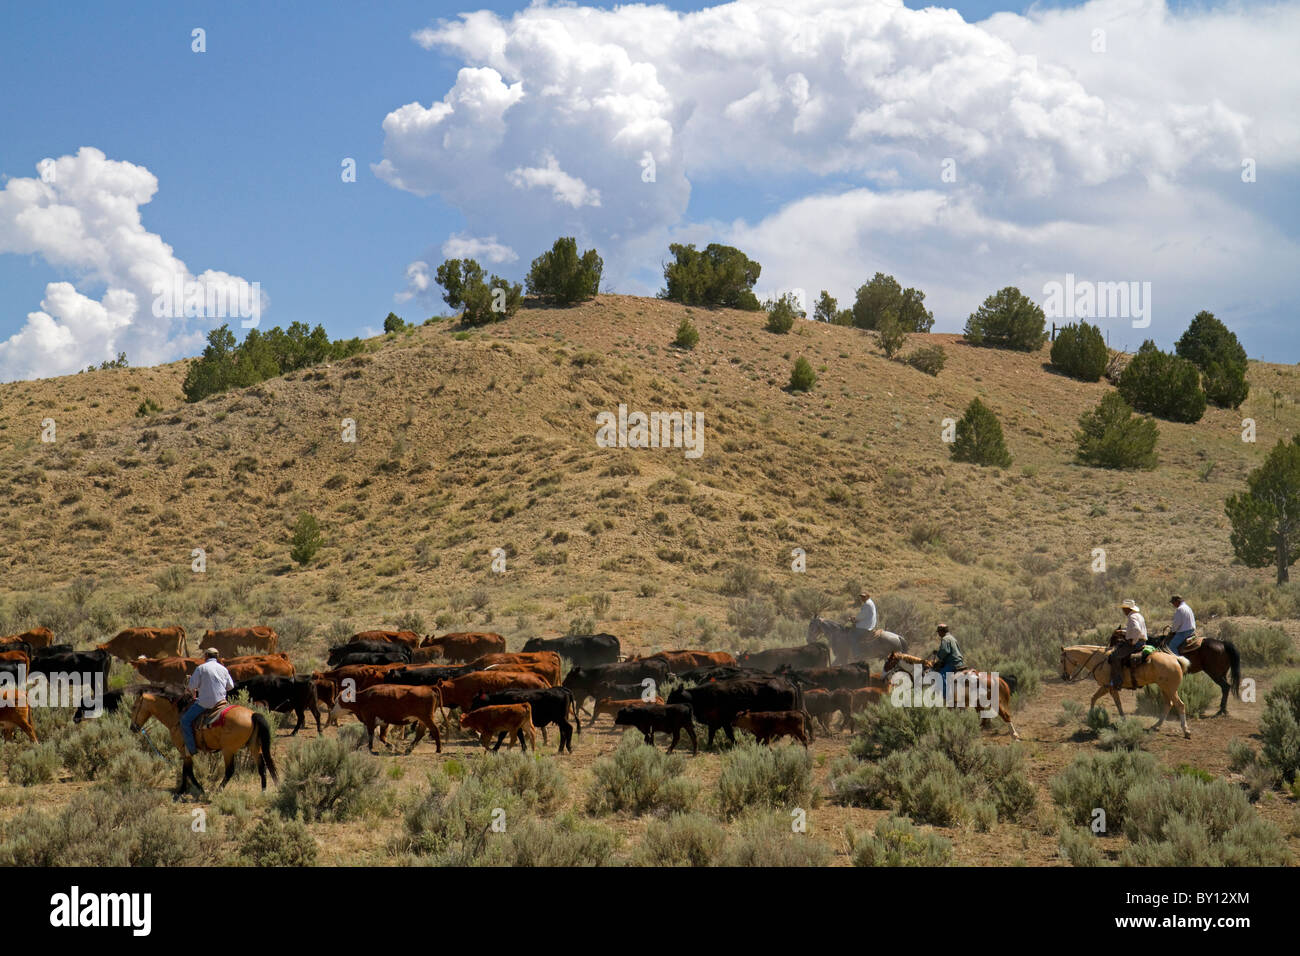 Cowboys on a cattle drive in the desert near Cuba, New Mexico, USA. Stock Photo